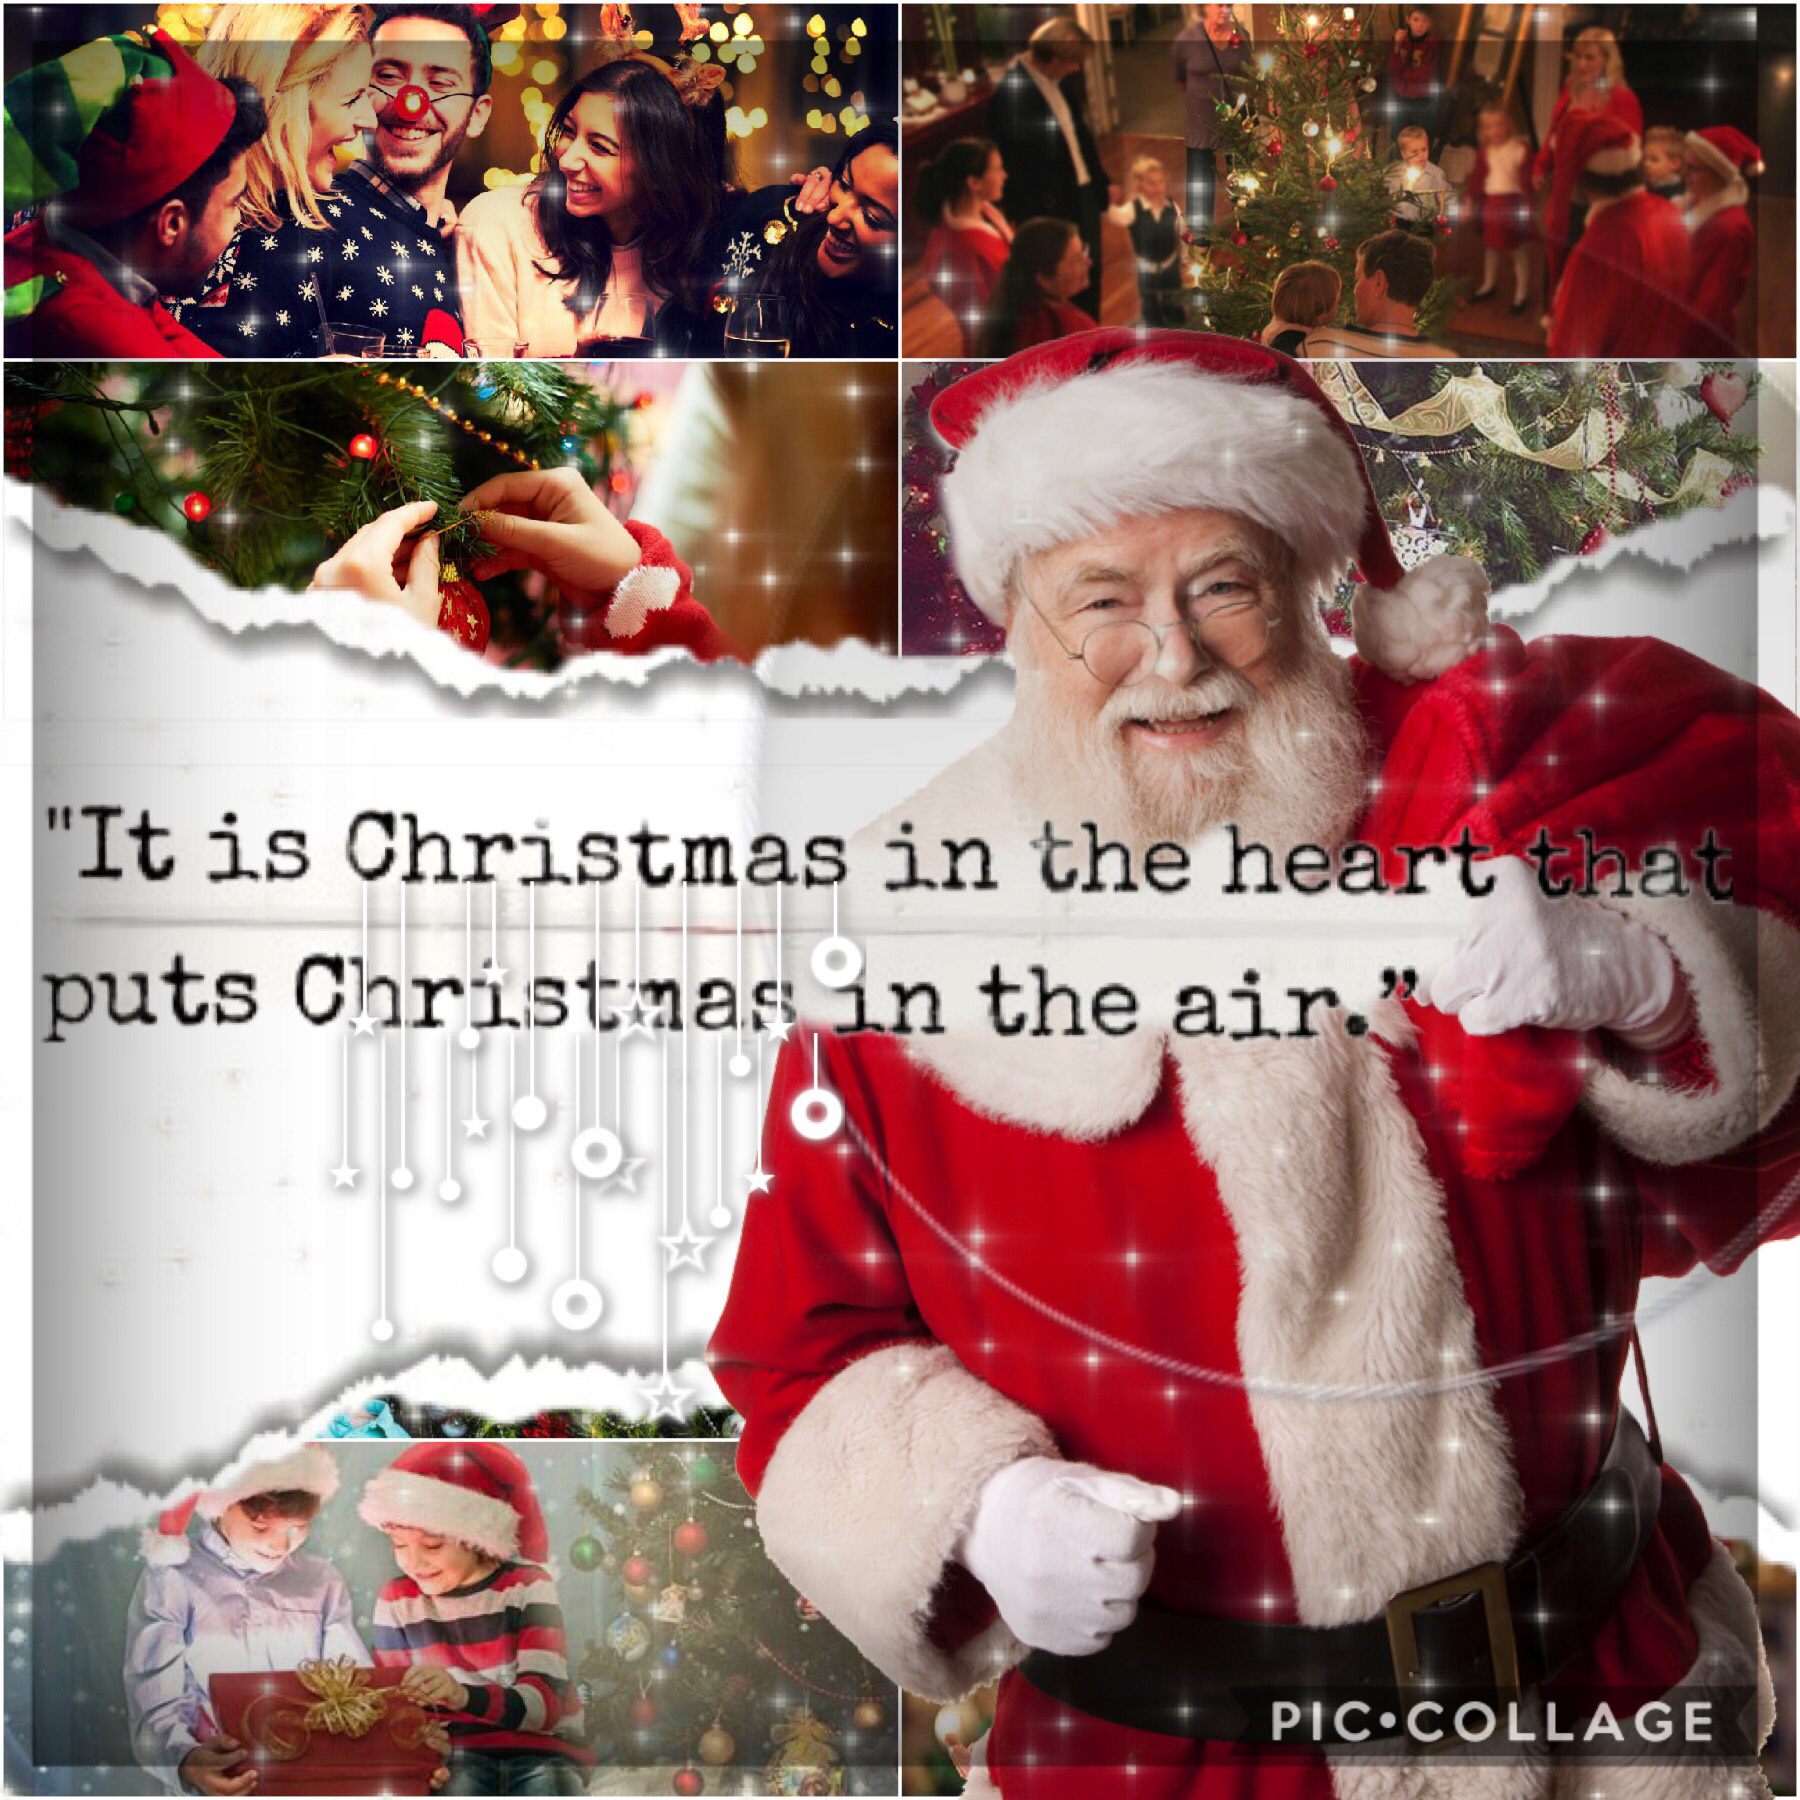 🎄❤️TAP❤️🎄
I CAN'T WAIT 'TIL CHRISTMAS!!!!! 6 sleeps to go...
Anyways so I've tried out this style because I've seen loads of collages so question for you amazing collagers, do you like this? Please comment. Oh and one more thing; sorry for being so inacti